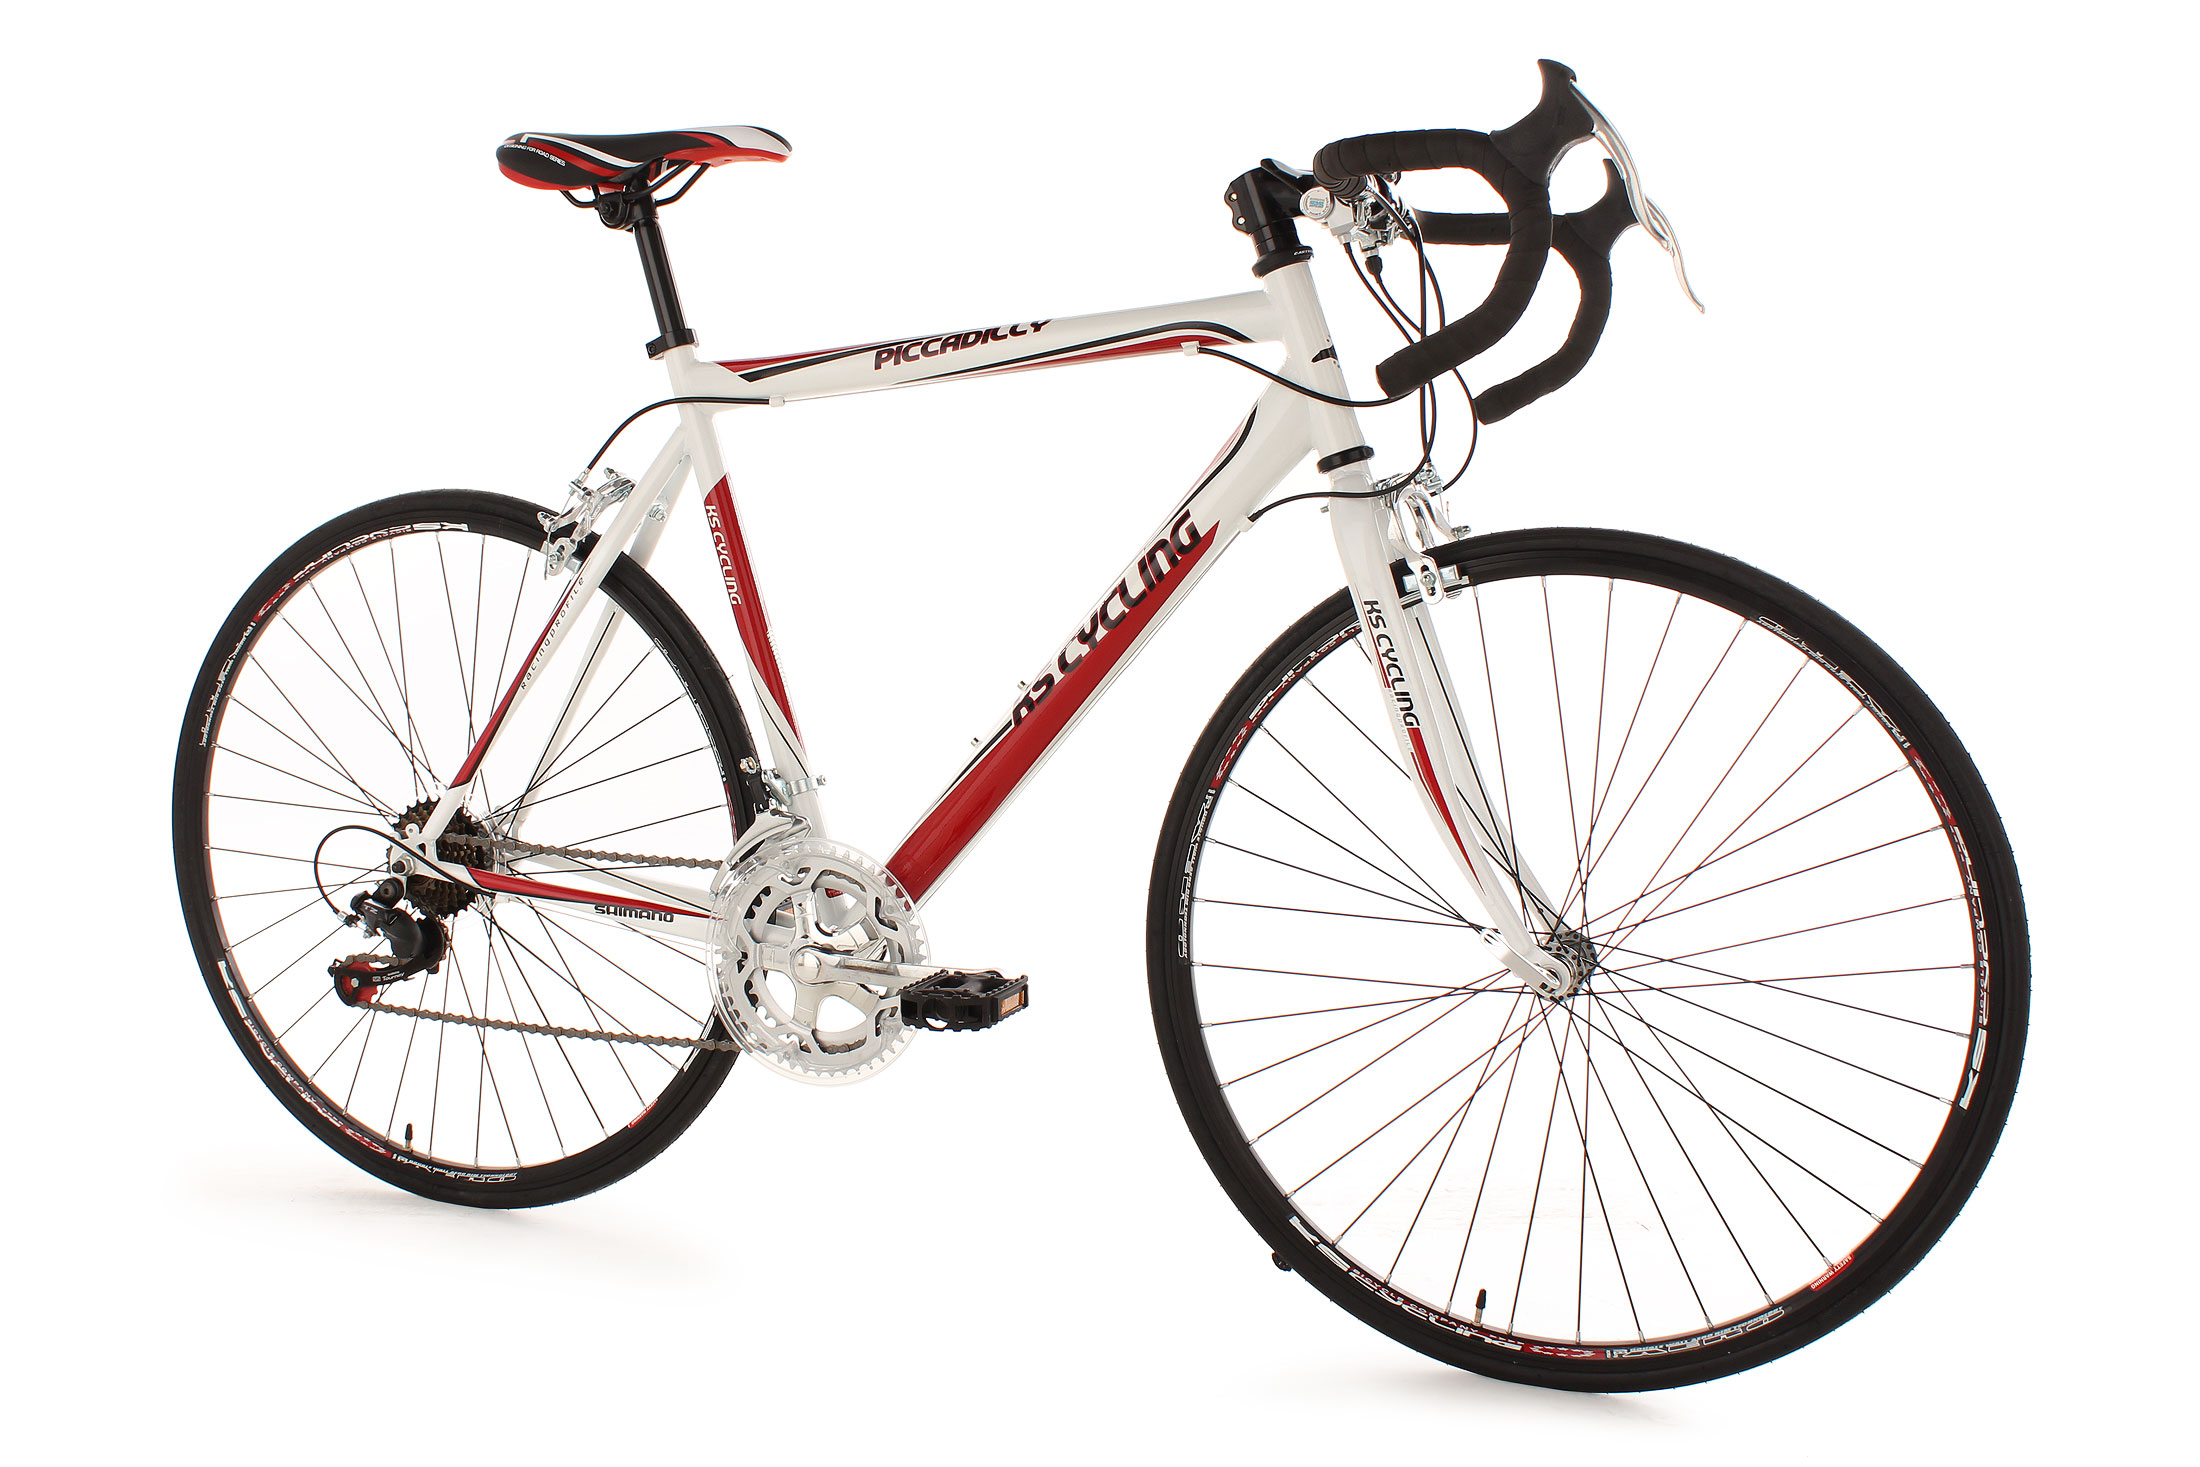 One Day Price - 28 inch racefiets Piccadilly wit